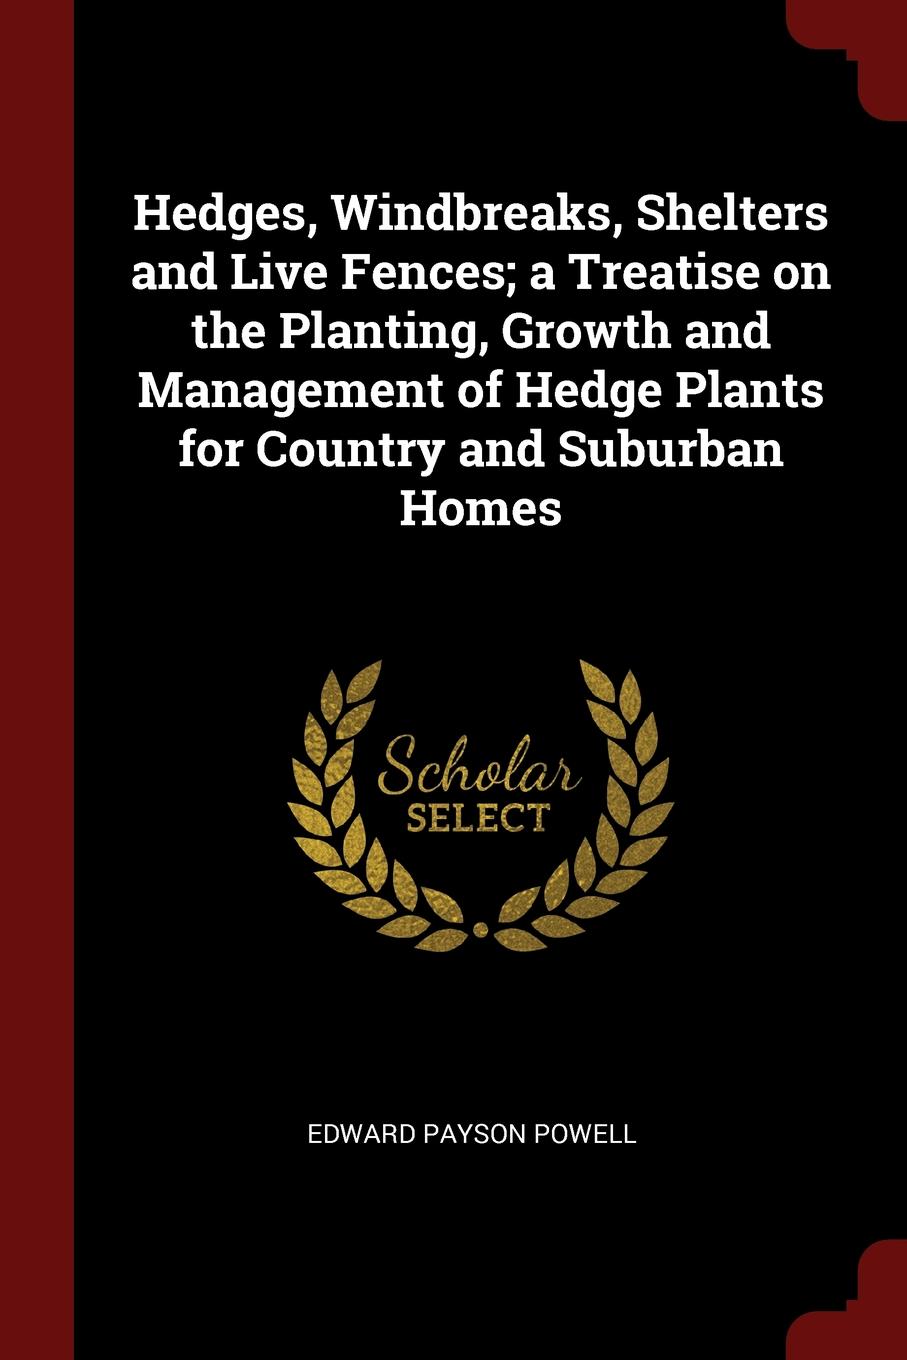 Hedges, Windbreaks, Shelters and Live Fences; a Treatise on the Planting, Growth and Management of Hedge Plants for Country and Suburban Homes